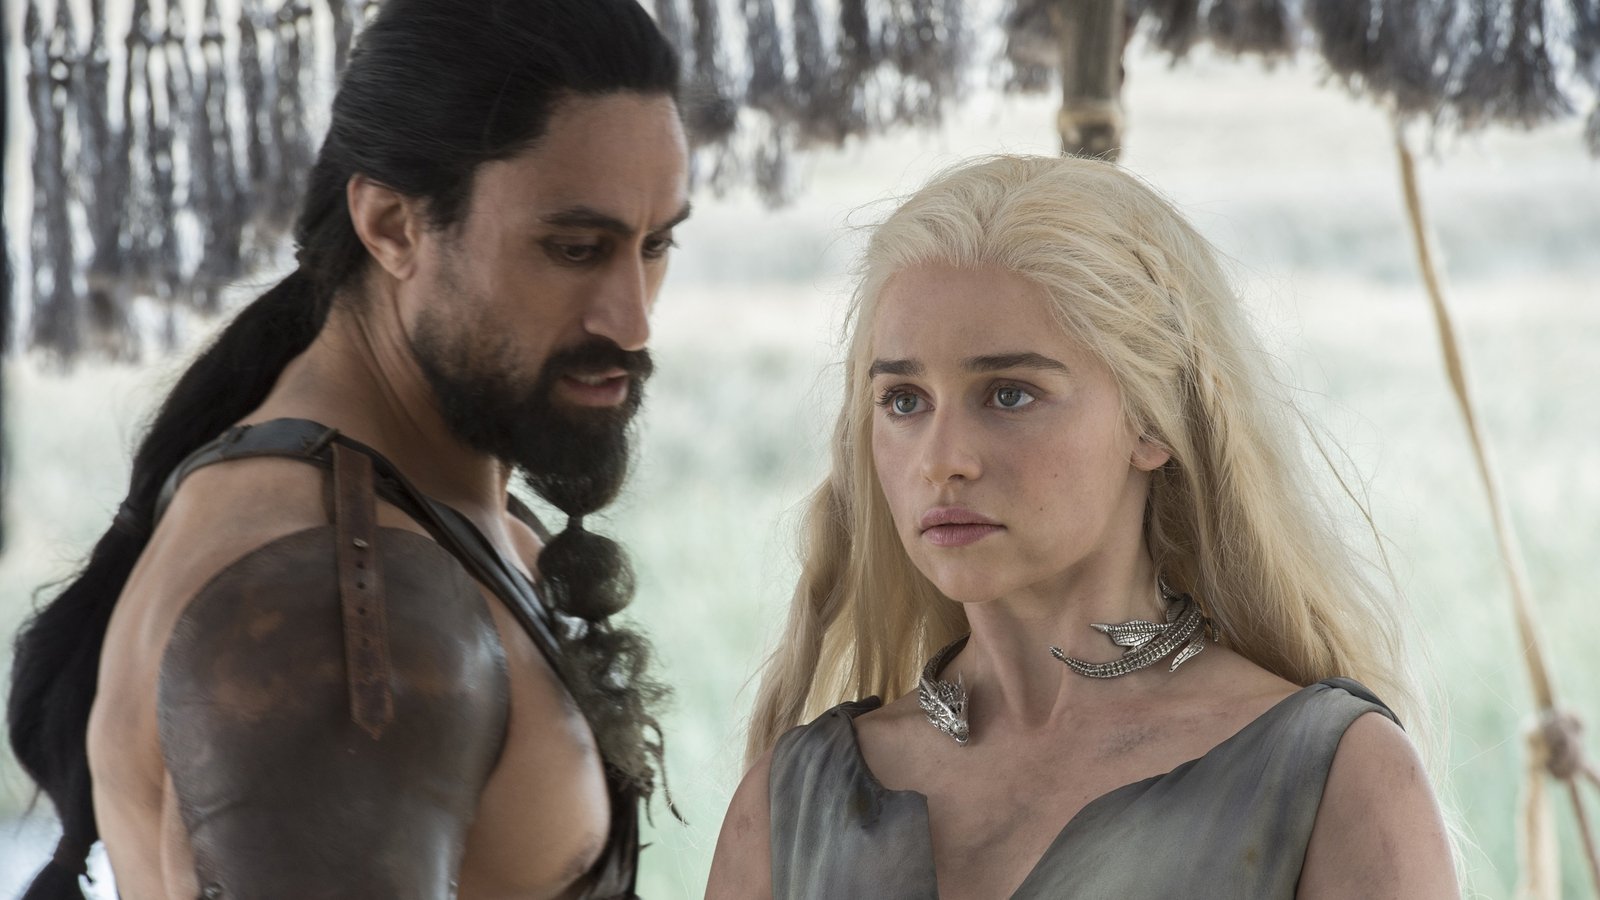 Game of Thrones: How to woo a lady with some brilliant Dothraki